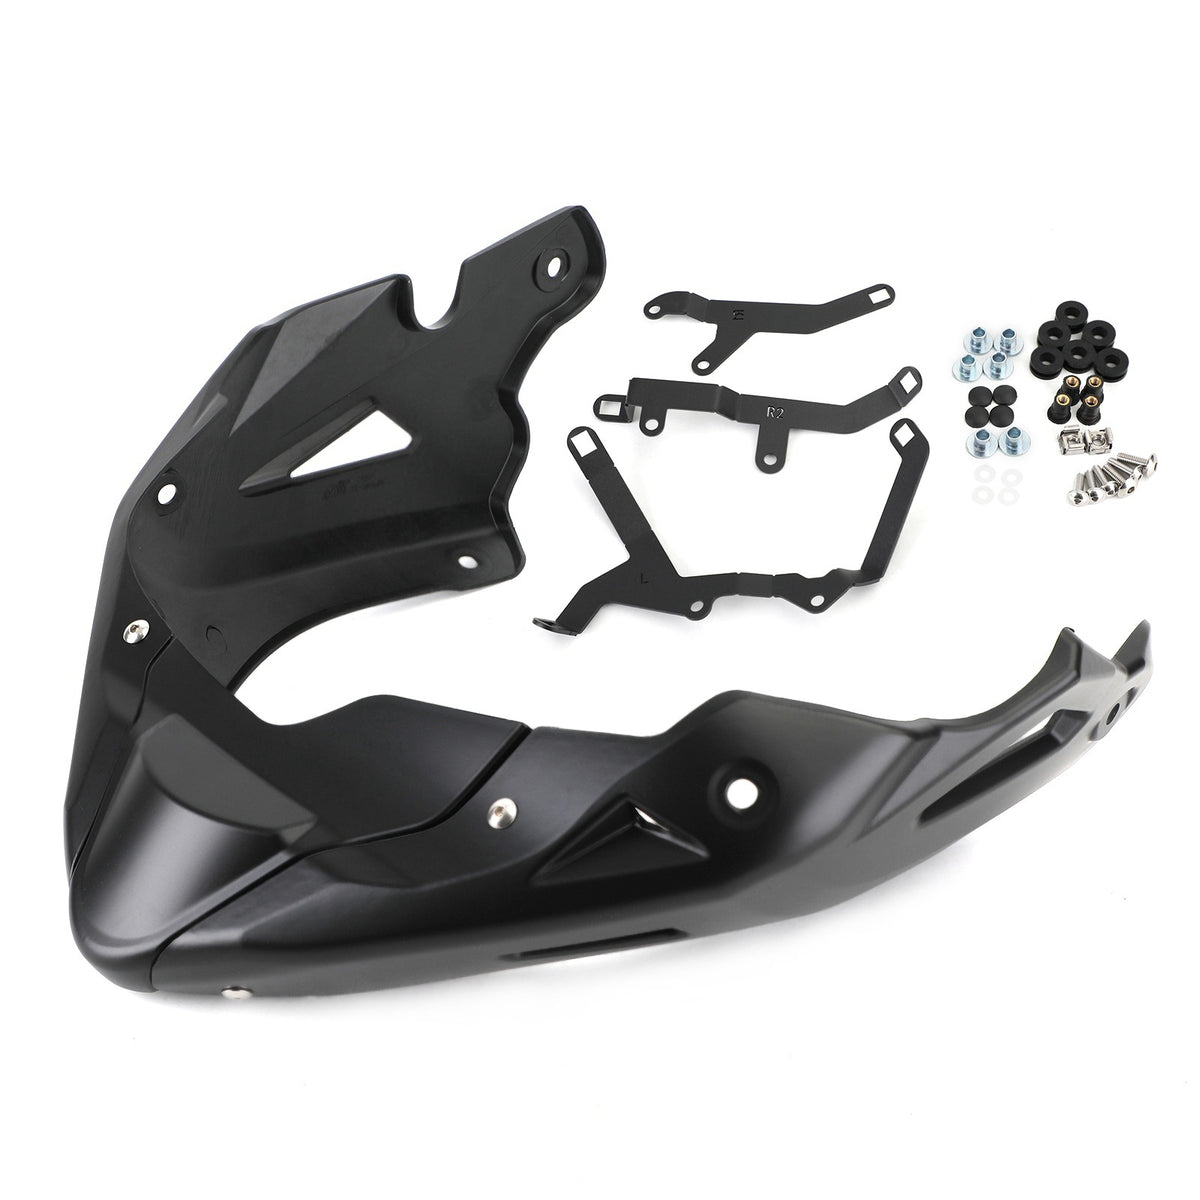 BELLY PAN UNDER ENGINE COVER FAIRINGS EXHUAST GUARD Fit for Honda CB650R 2019-2021